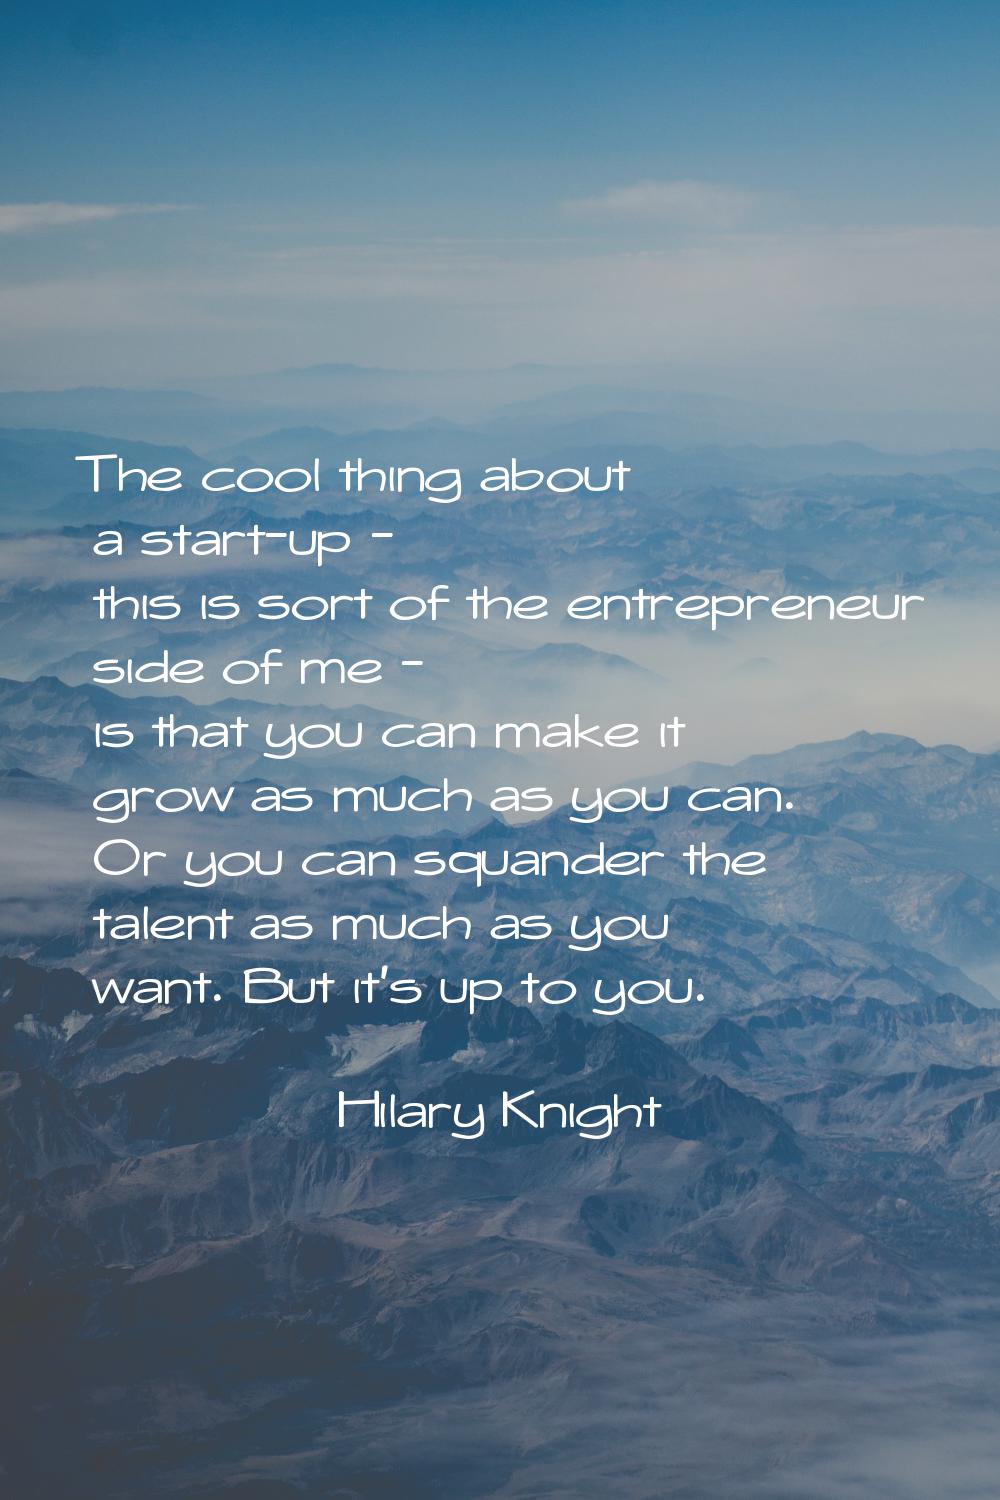 The cool thing about a start-up - this is sort of the entrepreneur side of me - is that you can mak